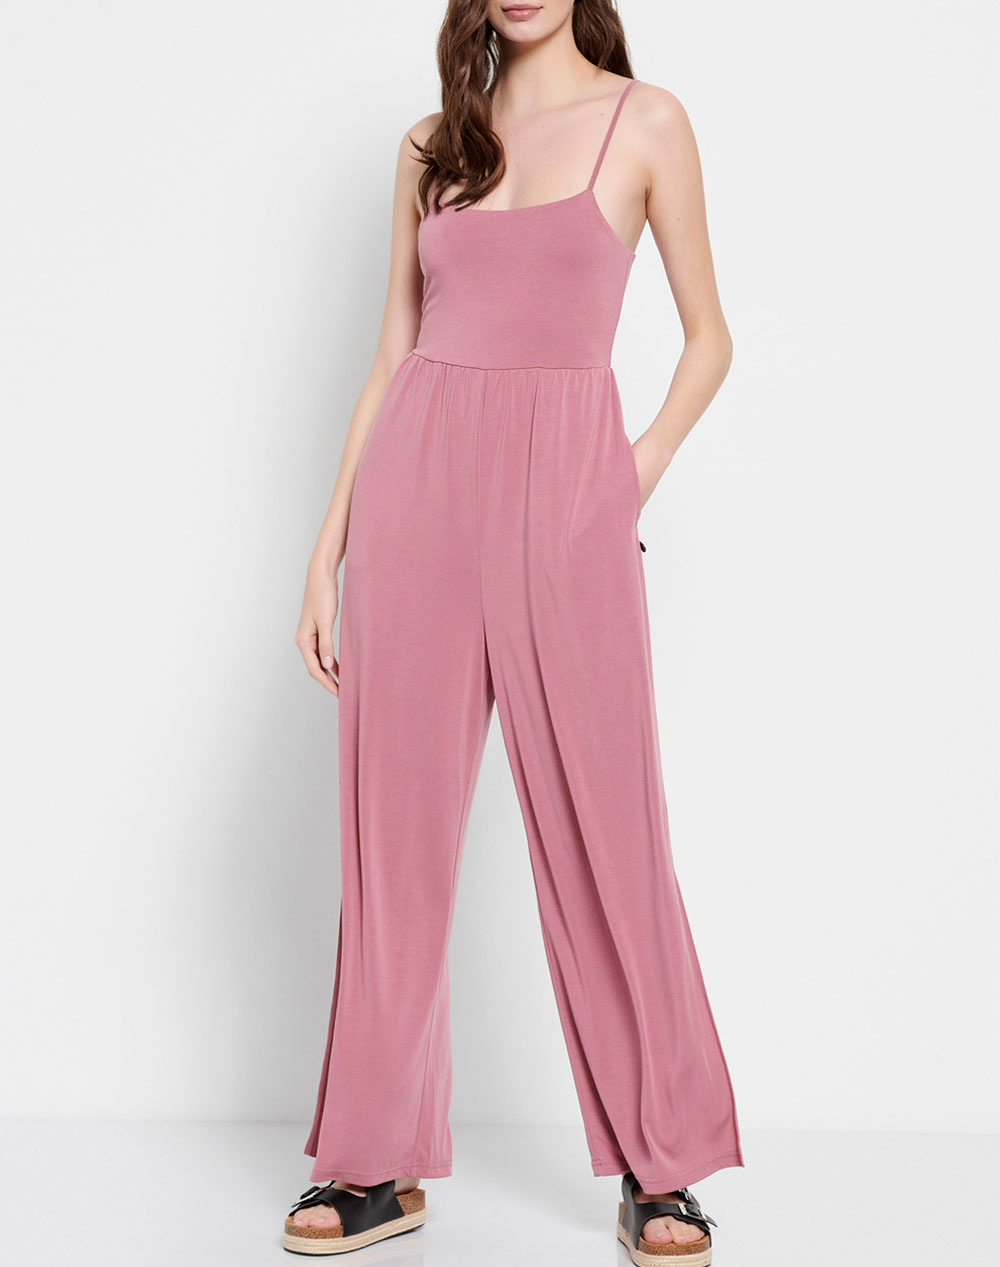 Womens jumpsuit with side pockets